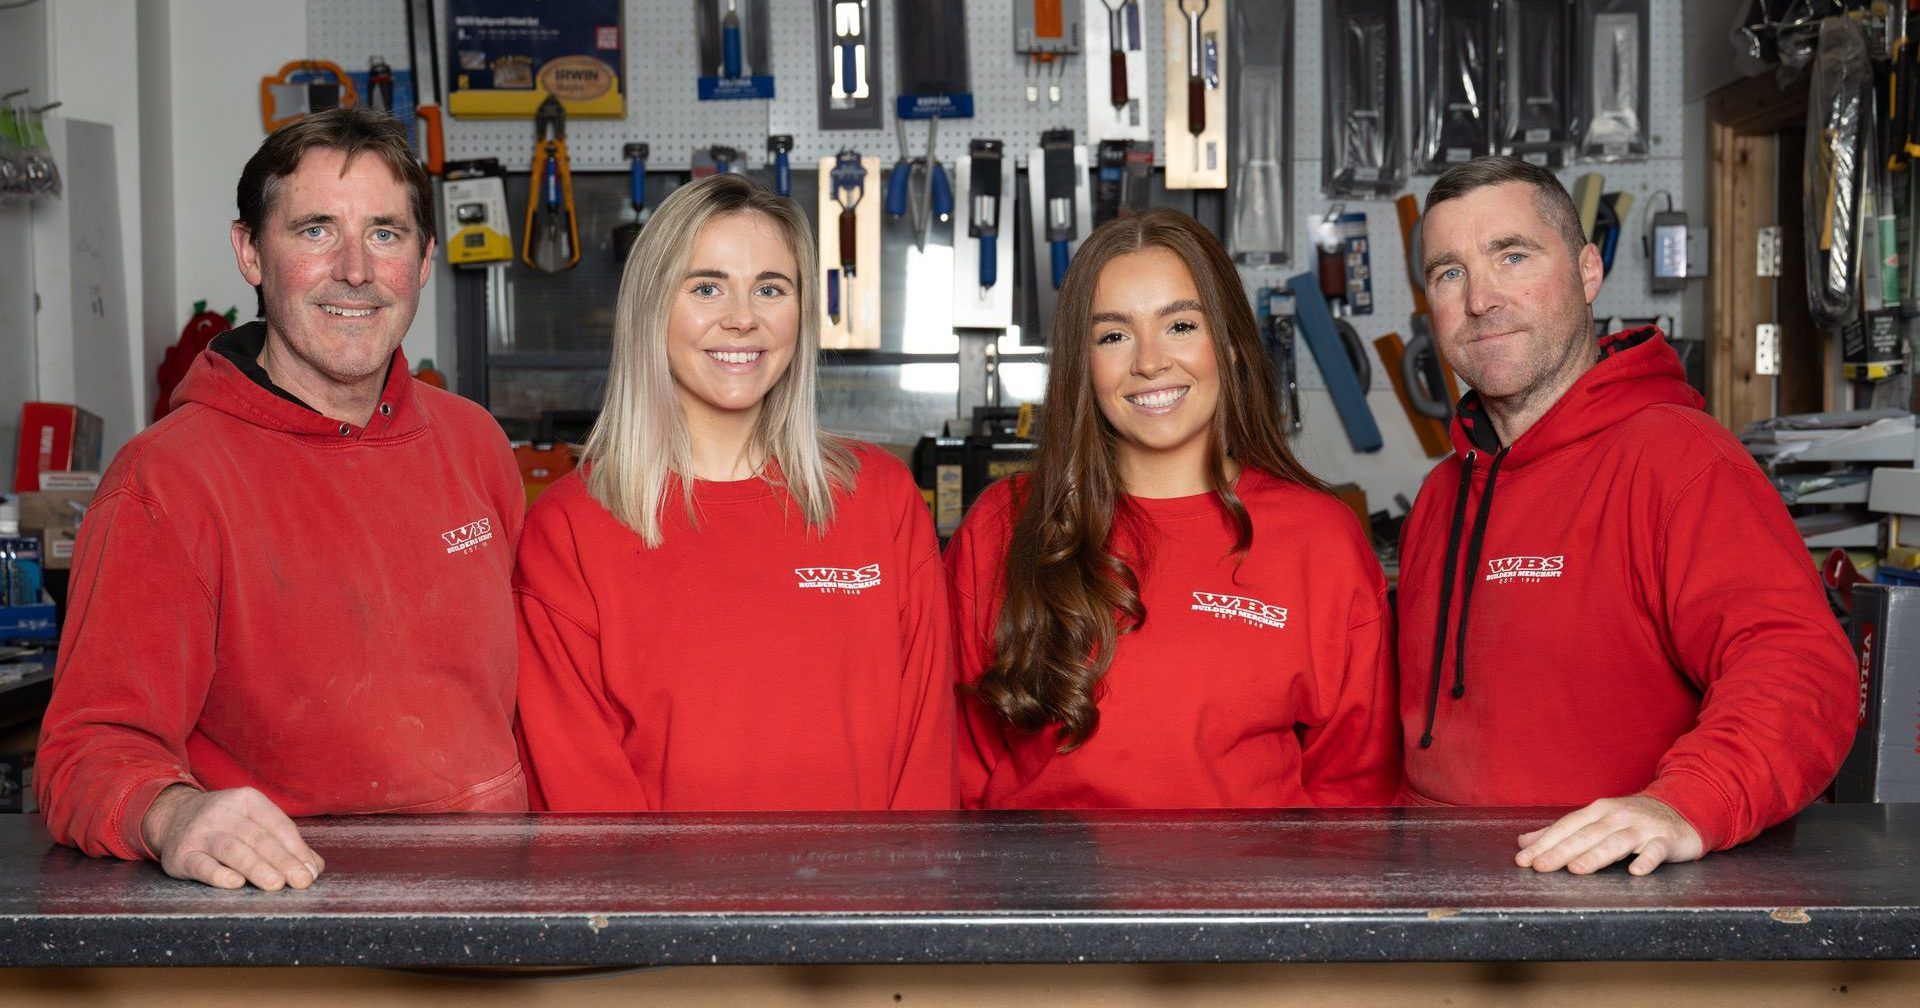 Four individuals in red uniforms standing behind a counter in a workshop.